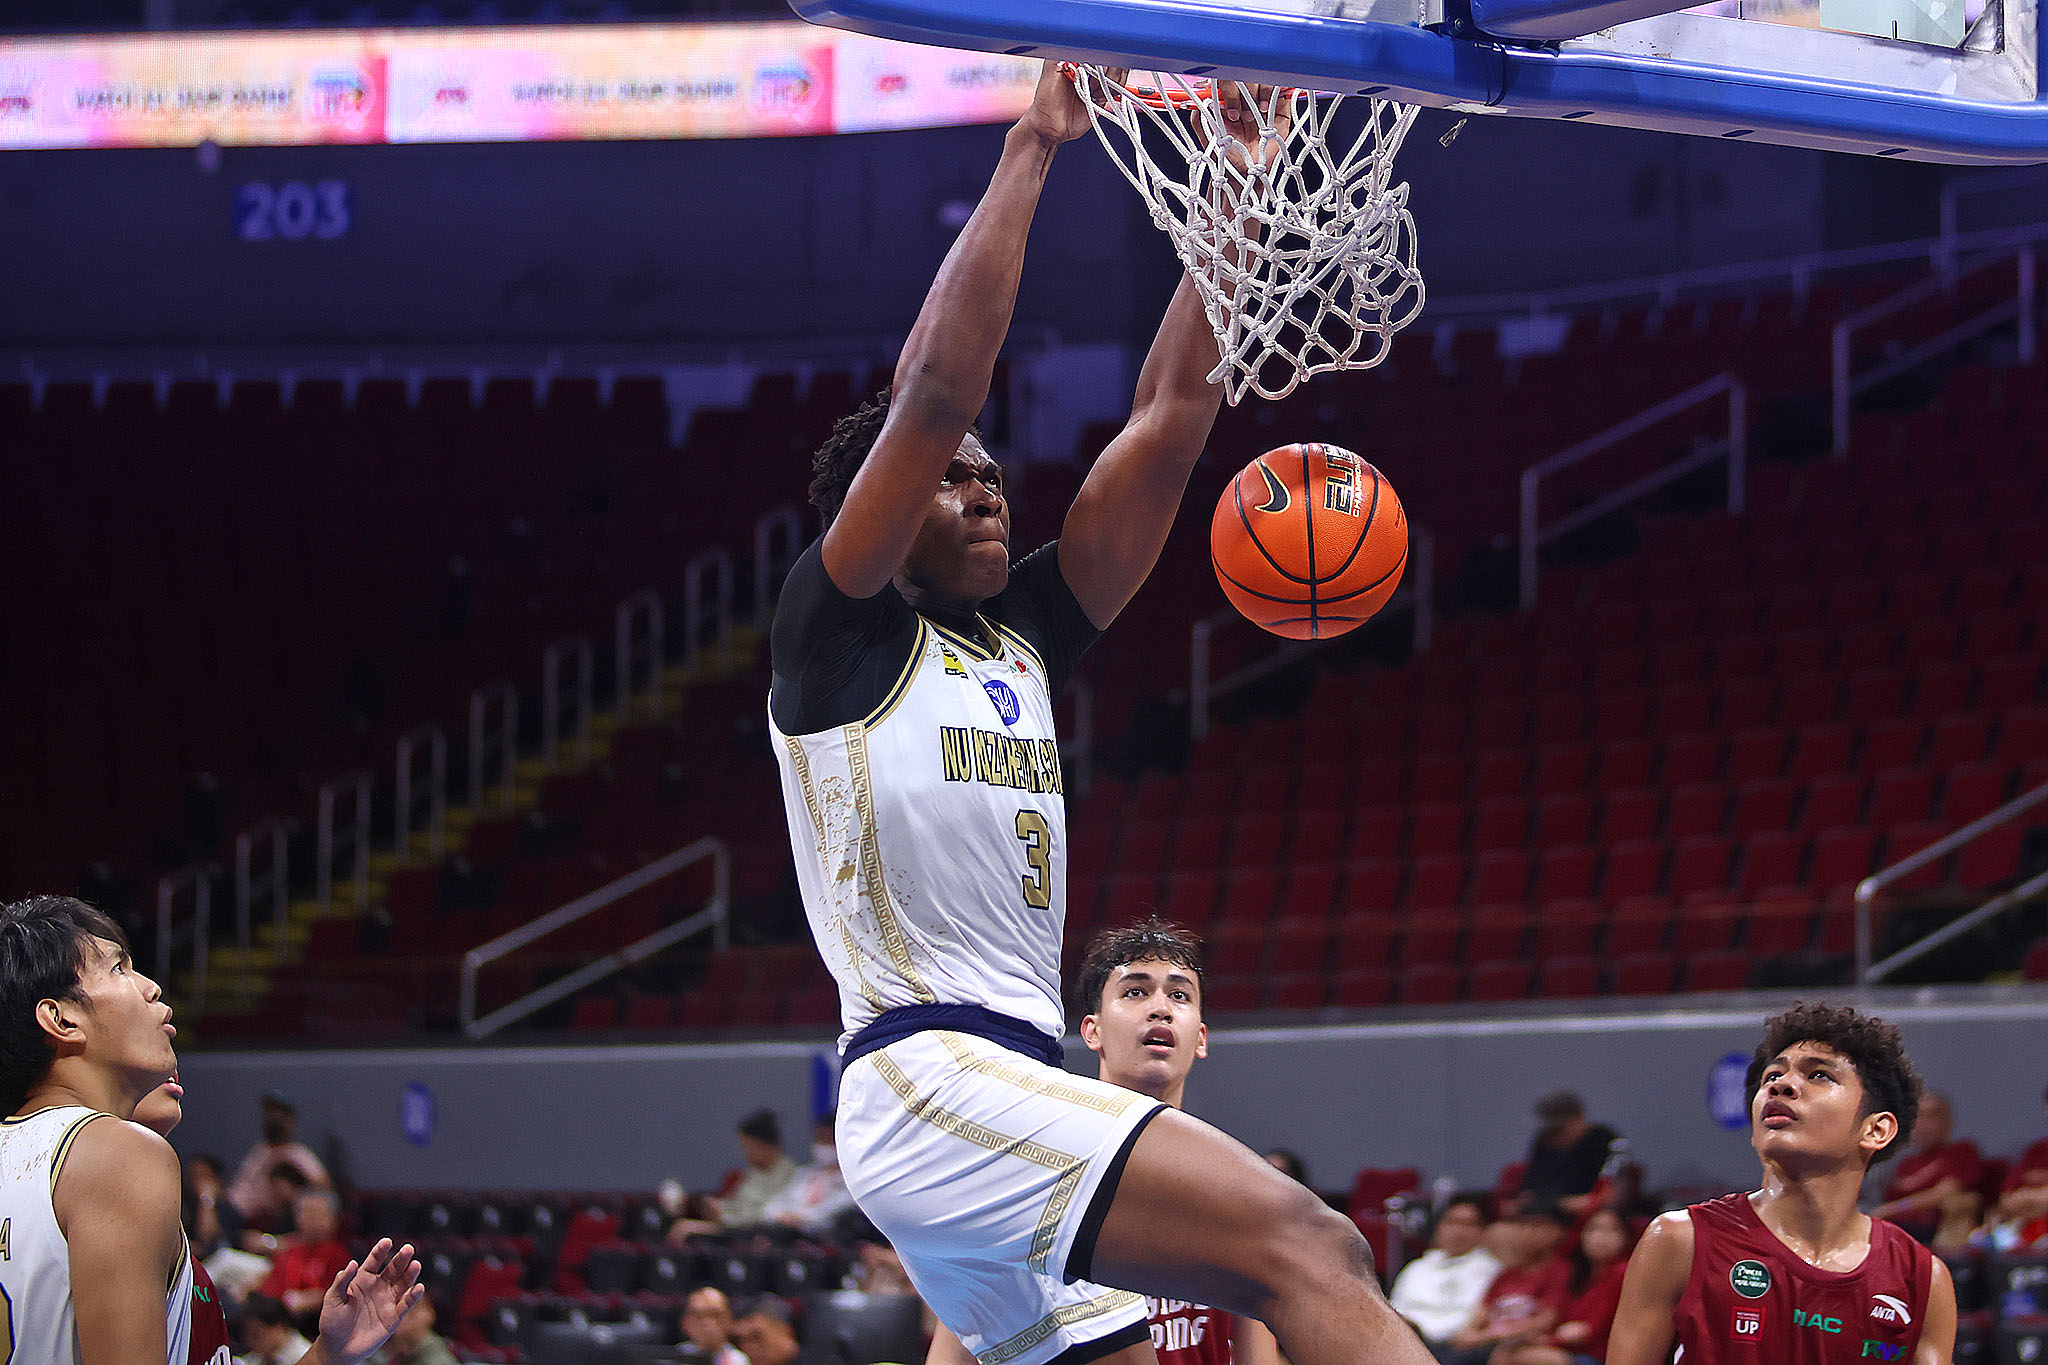 UAAP86-HSBB-Collins-Akowe Collins Akowe not satisfied after breaking boys’ record: ‘My goal is to break the UAAP record’ Basketball News NU UAAP  - philippine sports news